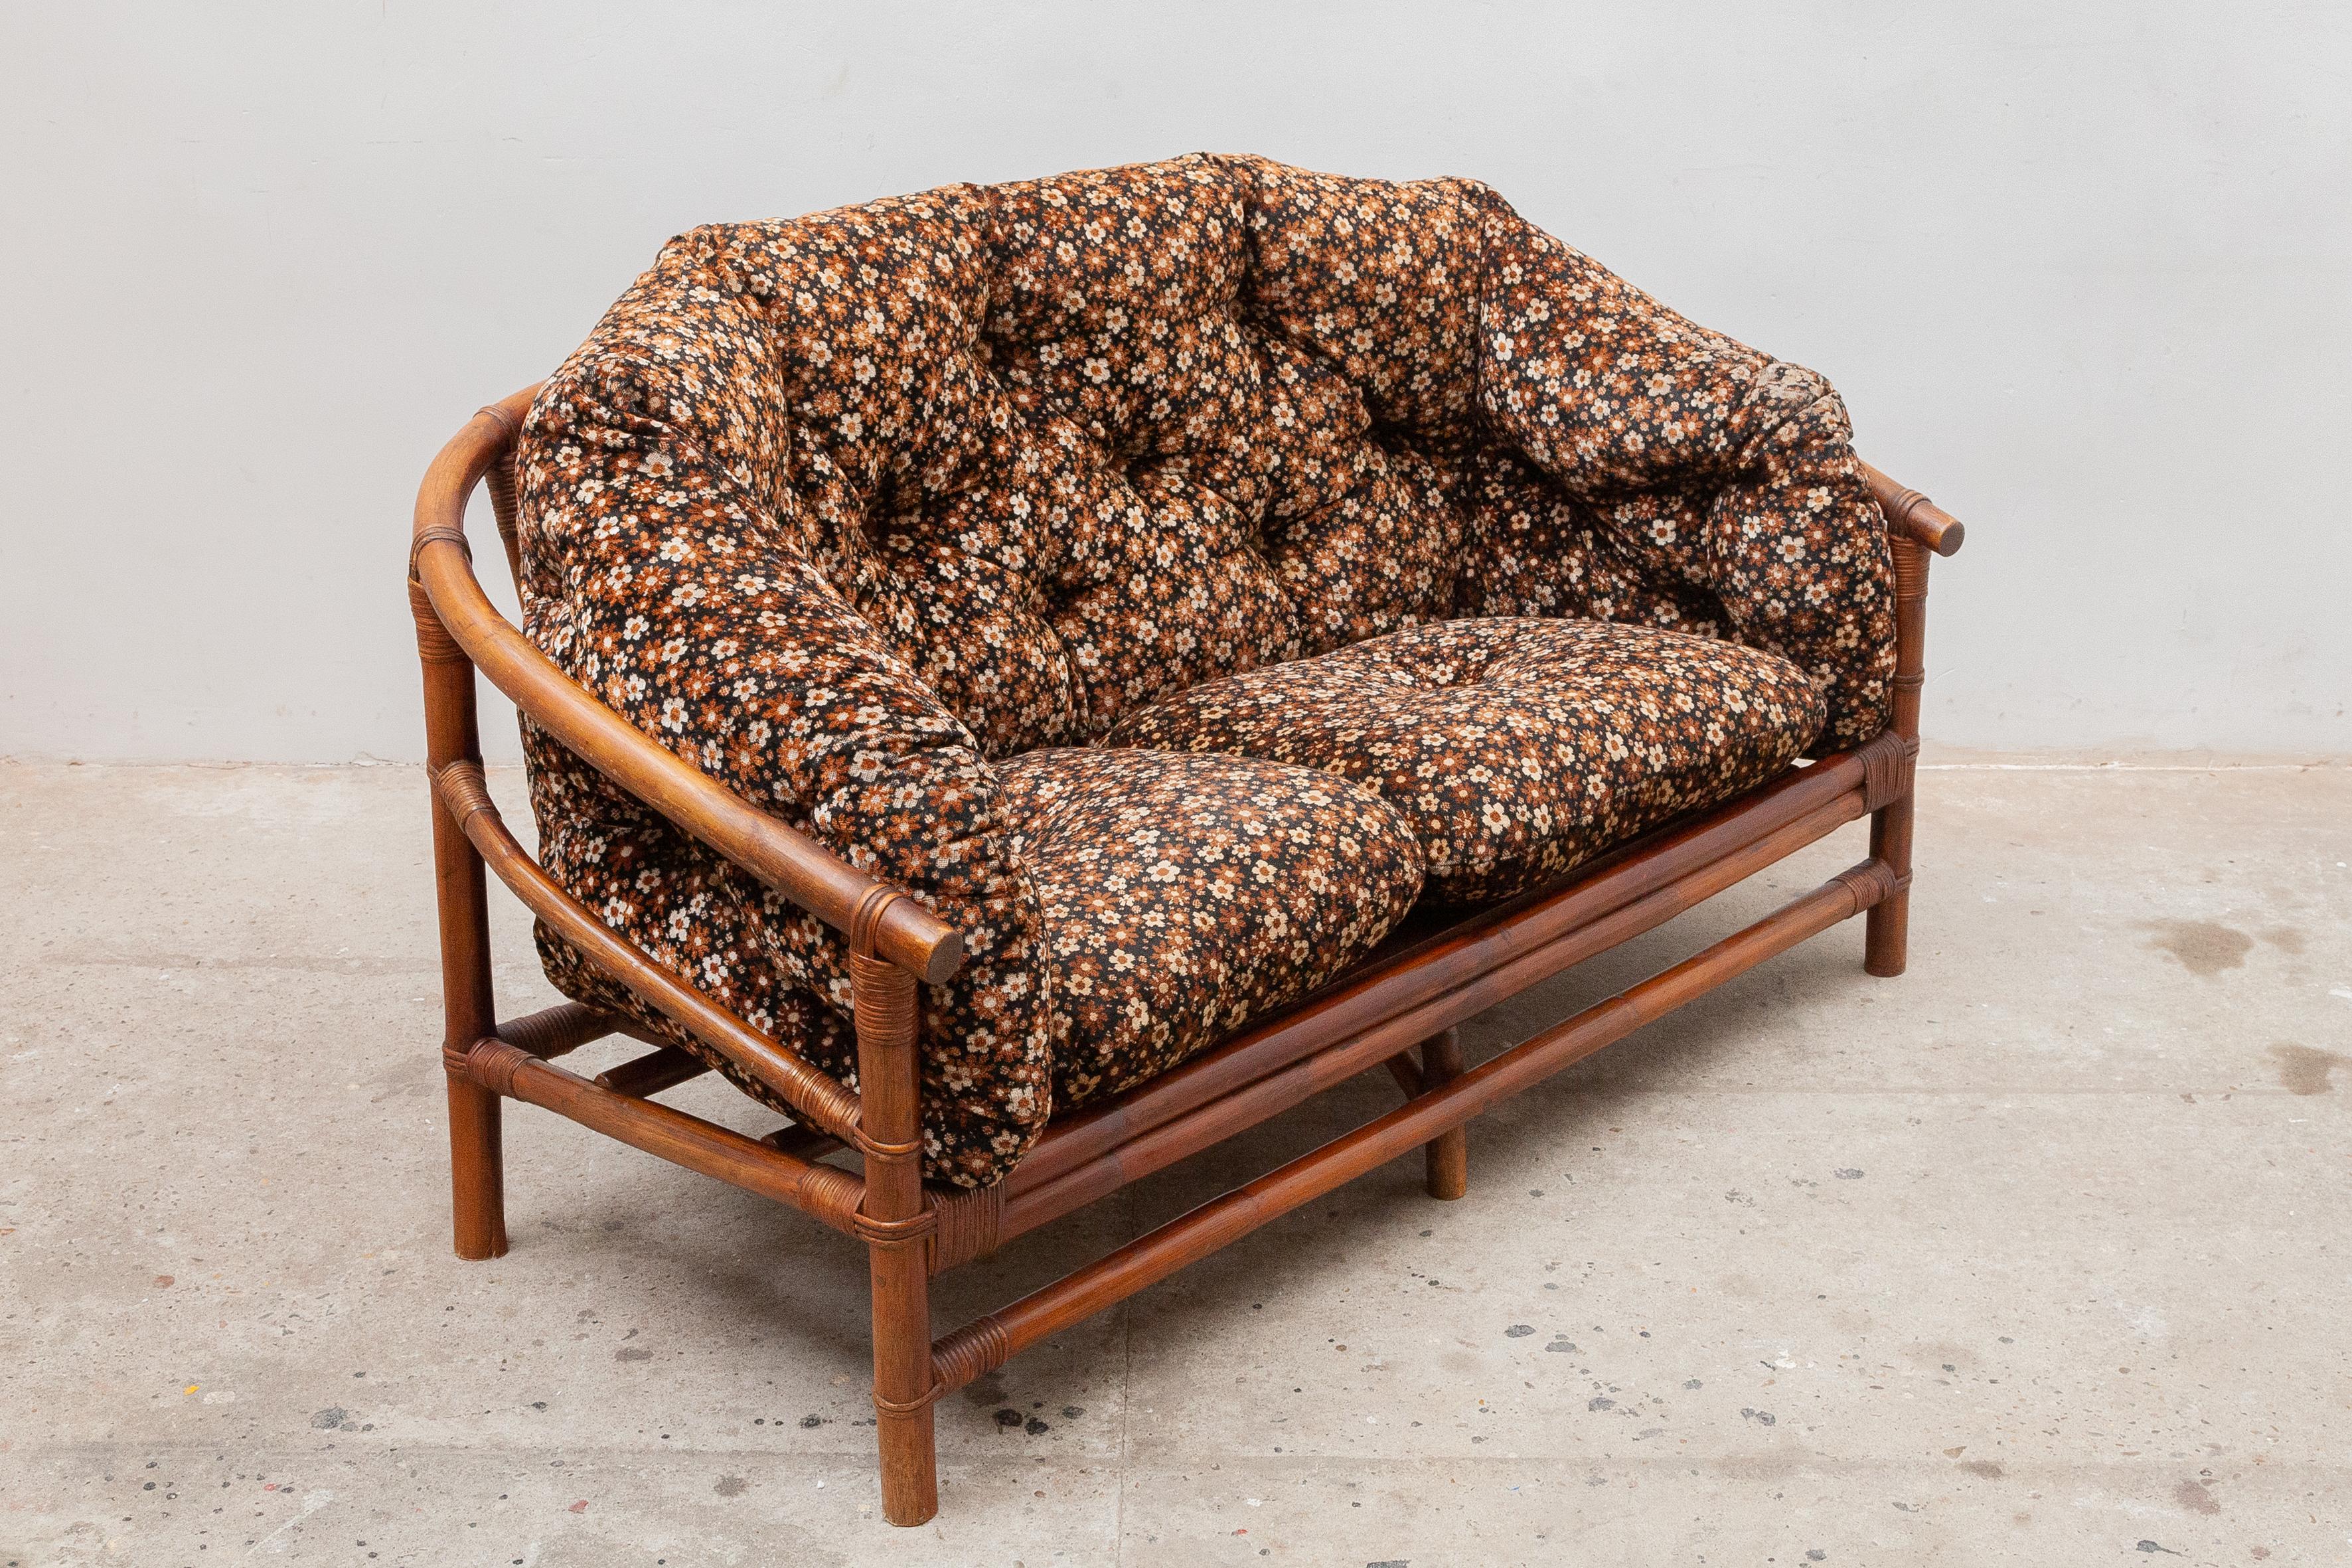 A beautiful original love sofa for your porch with an absolute sixties atmosphere. The furniture is handcrafted from darkened thick bamboo and teak seats draped with one-piece thick cushions in corduroy upholstery with a cute typical sixties floral